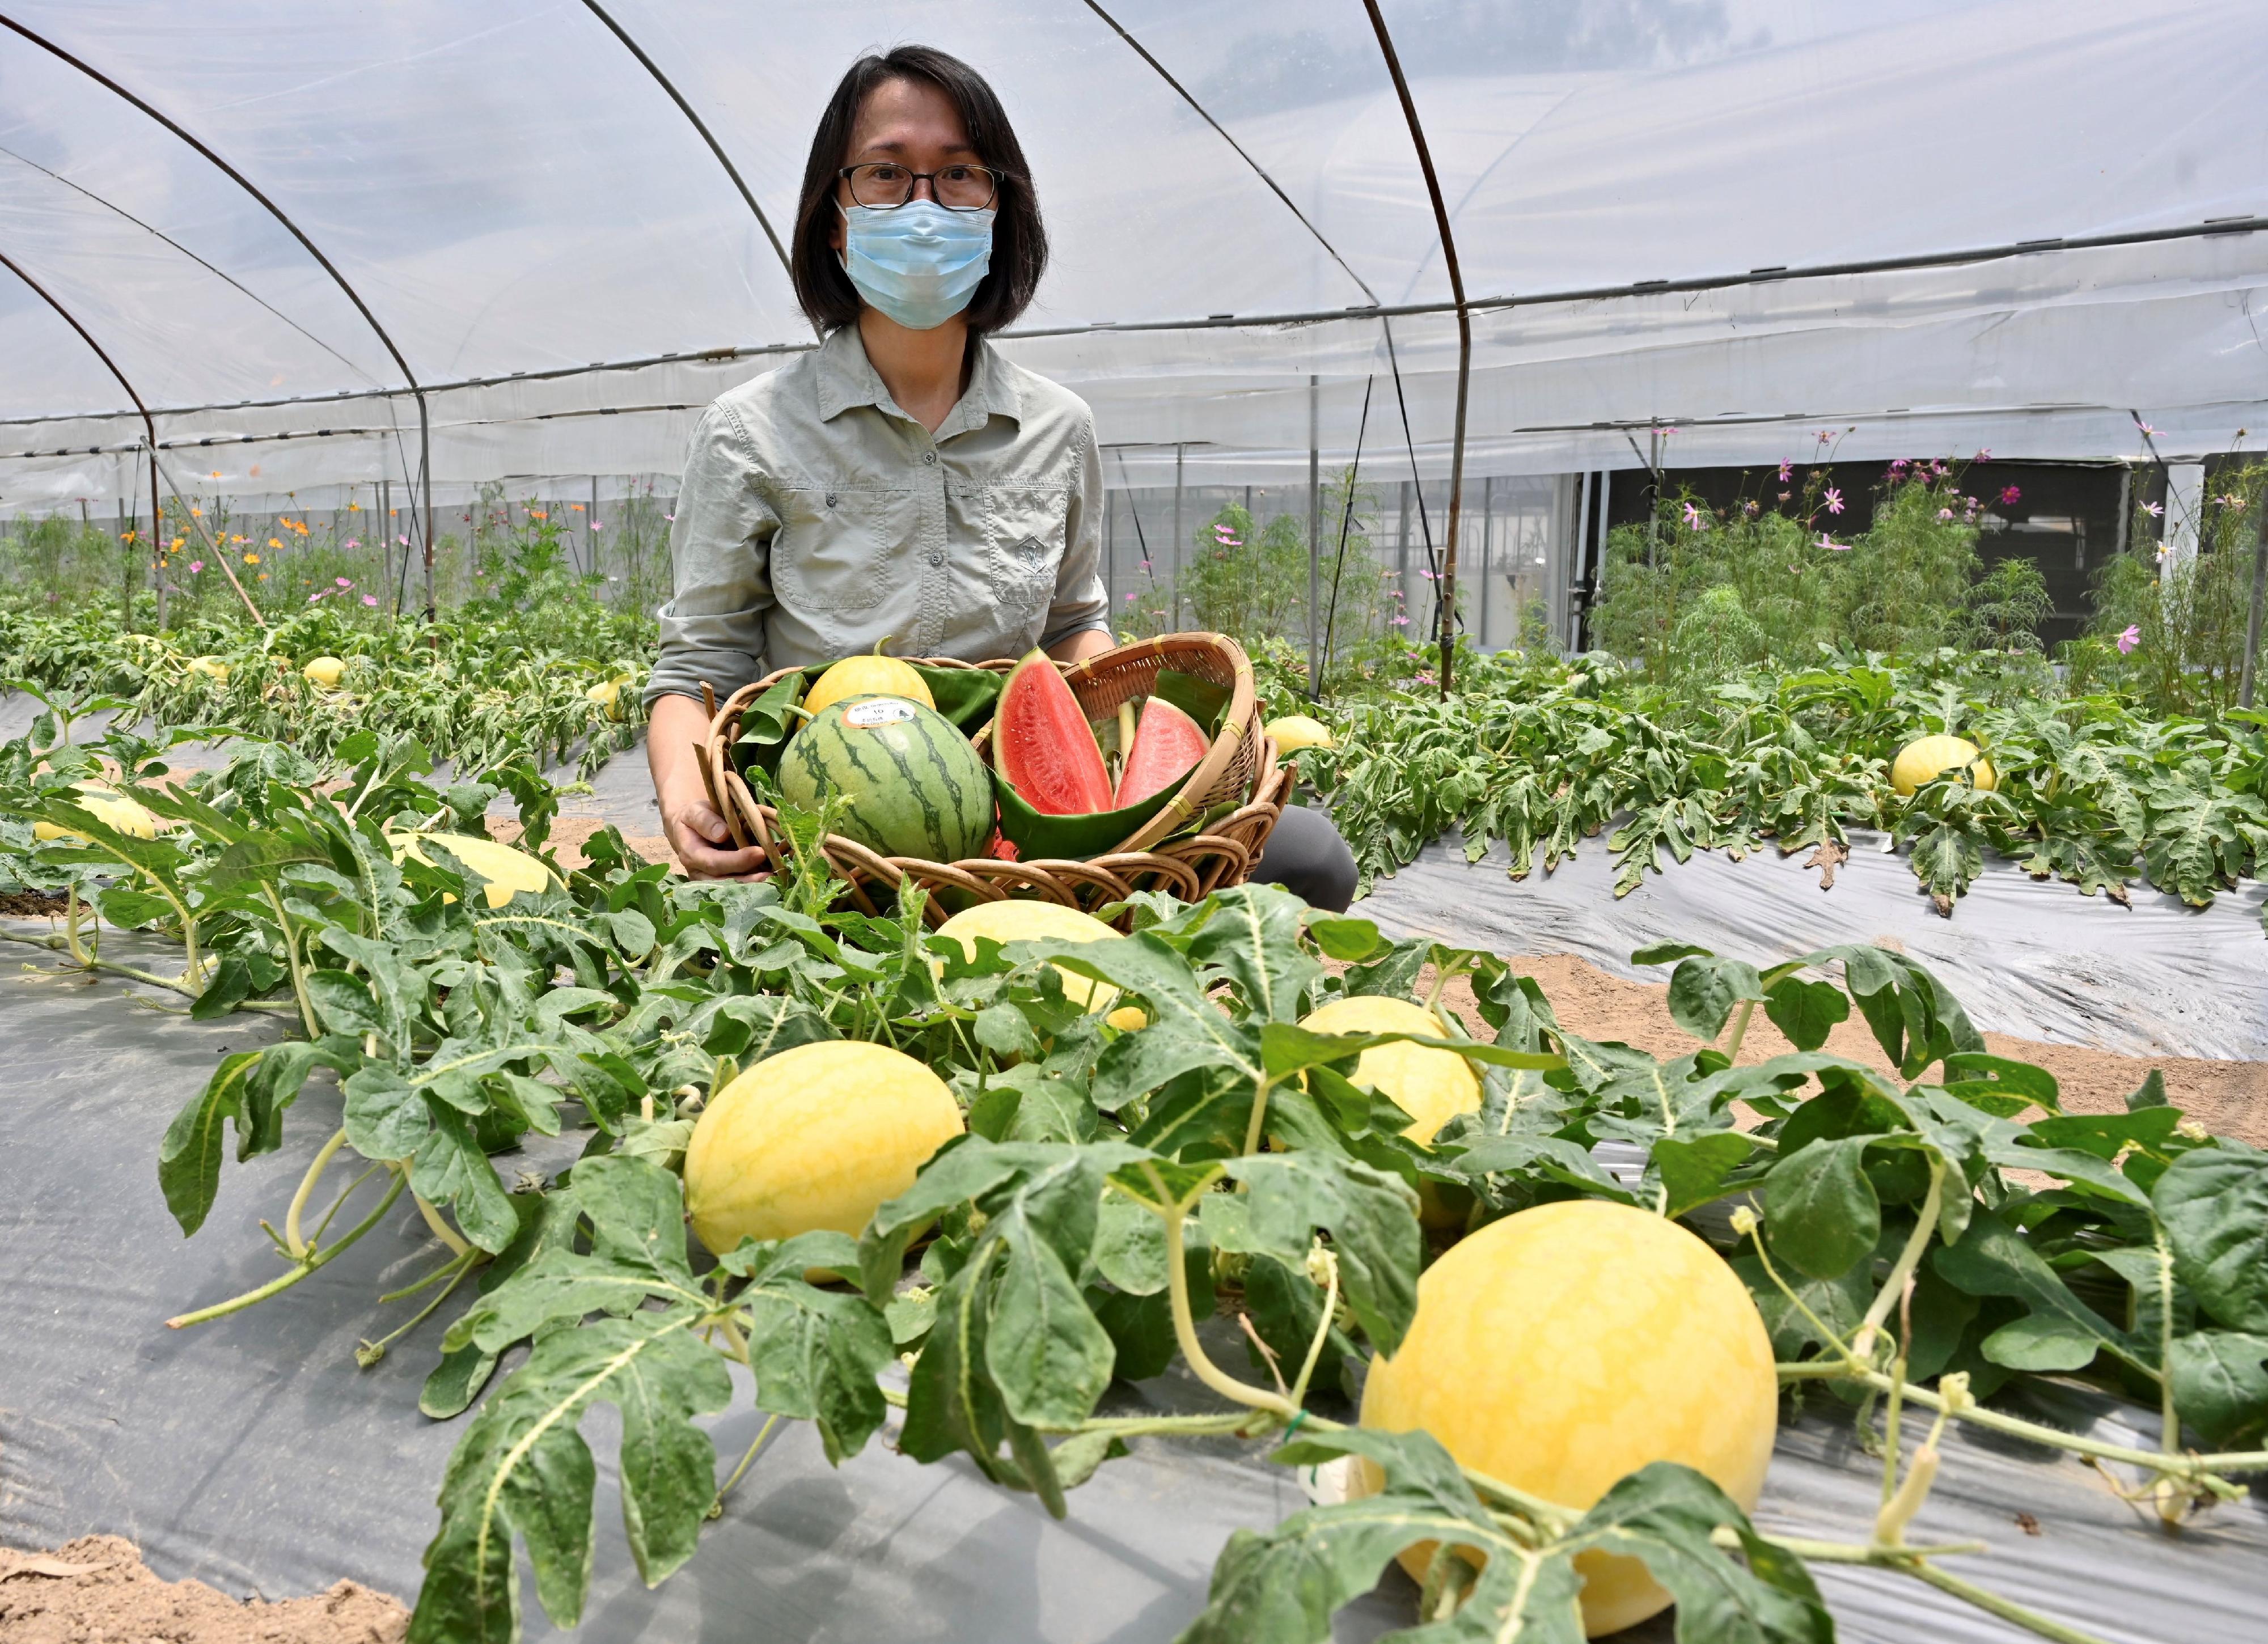 The Agriculture, Fisheries and Conservation Department (AFCD) today (June 29) introduced three highlighted varieties of organic watermelons for the Local Organic Watermelon Festival. Photo shows Agricultural Officer (Horticulture) of the AFCD, Ms Wong Mun-wai, introducing the highlighted varieties of watermelons as part of the department's promotion of environmentally friendly cultivation practices through organic farming.